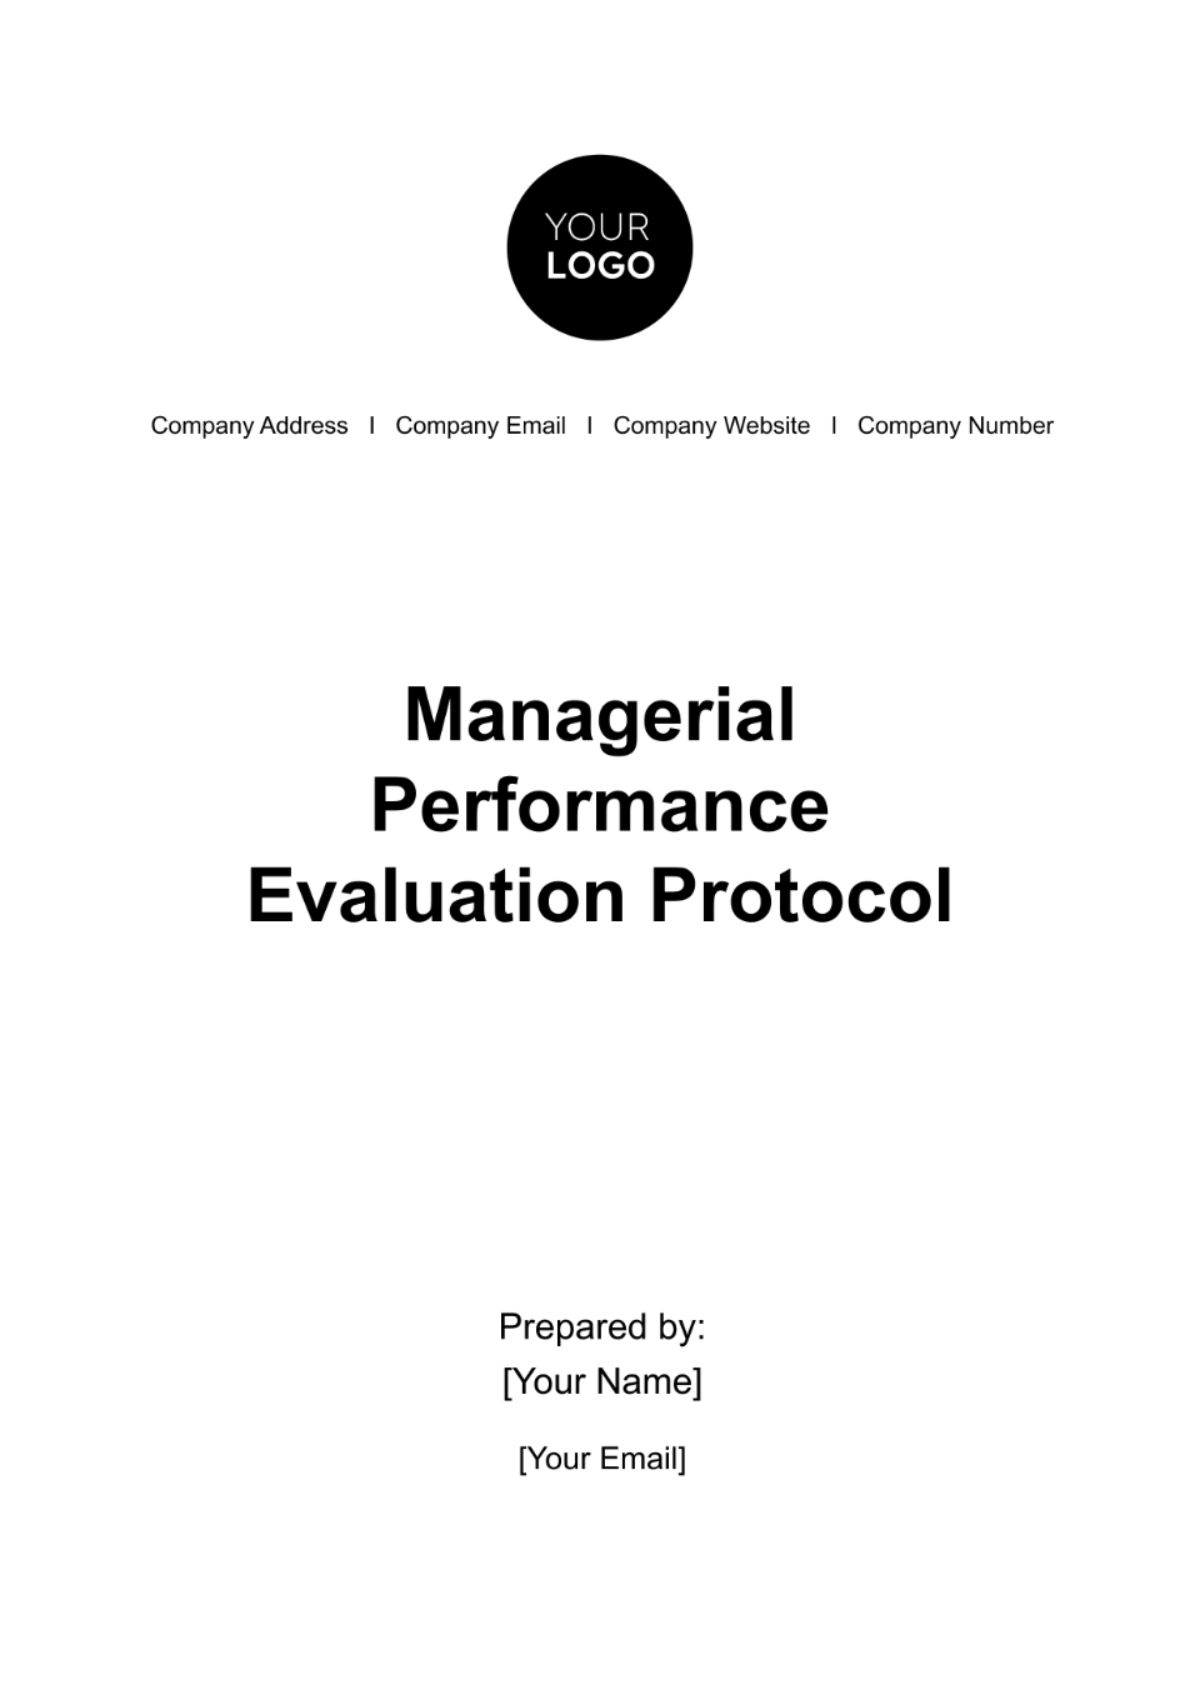 Free Managerial Performance Evaluation Protocol HR Template